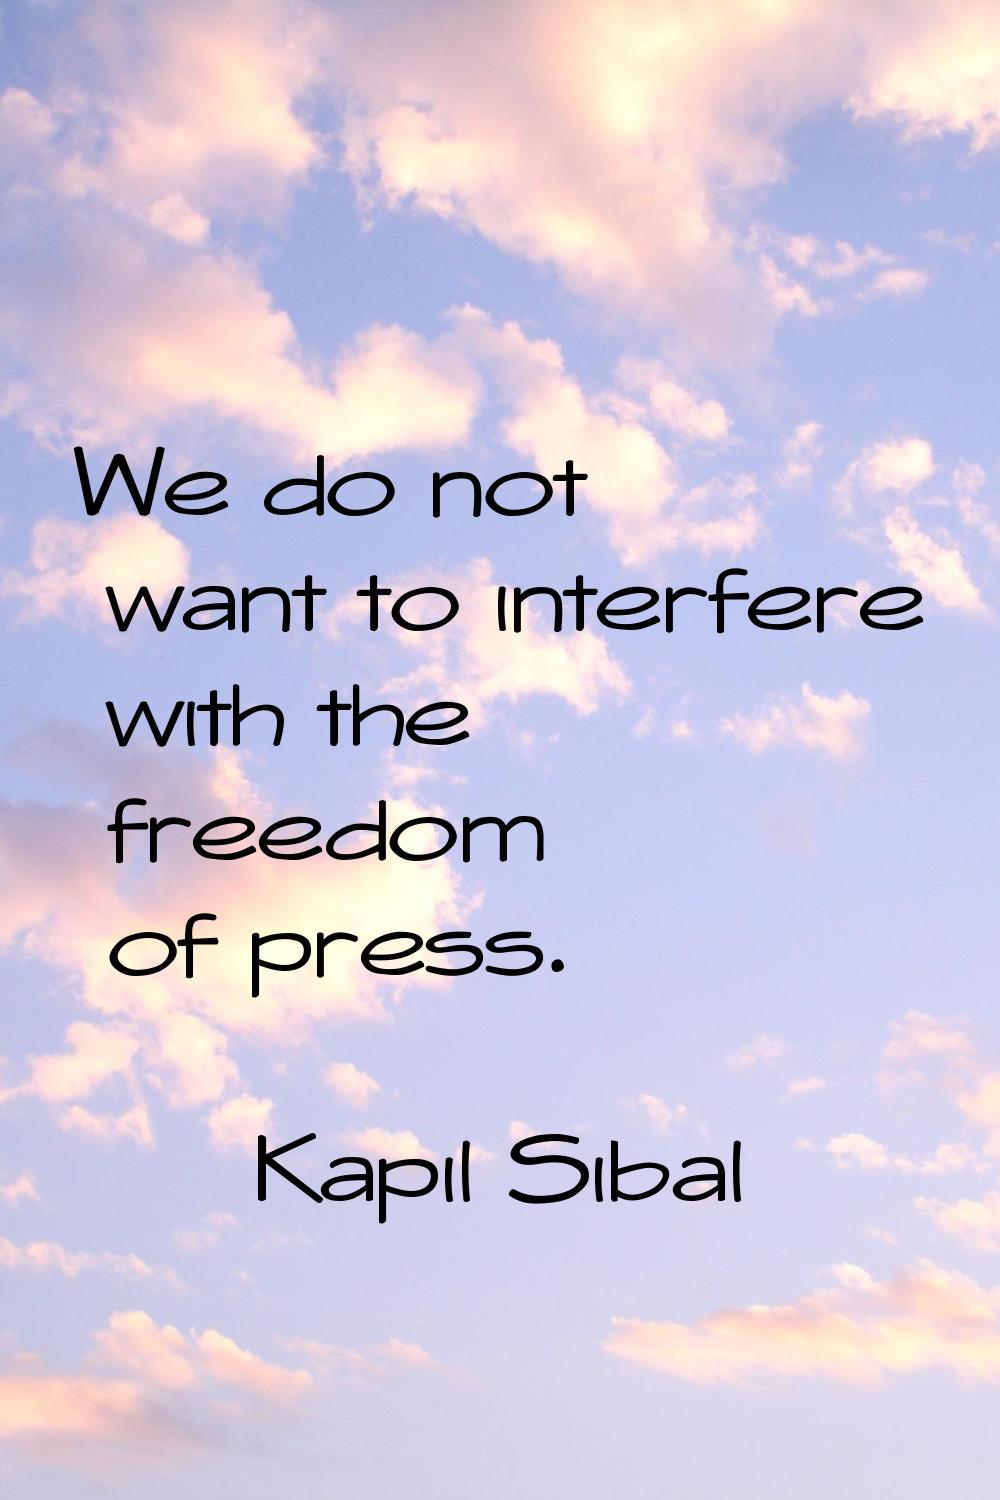 We do not want to interfere with the freedom of press.